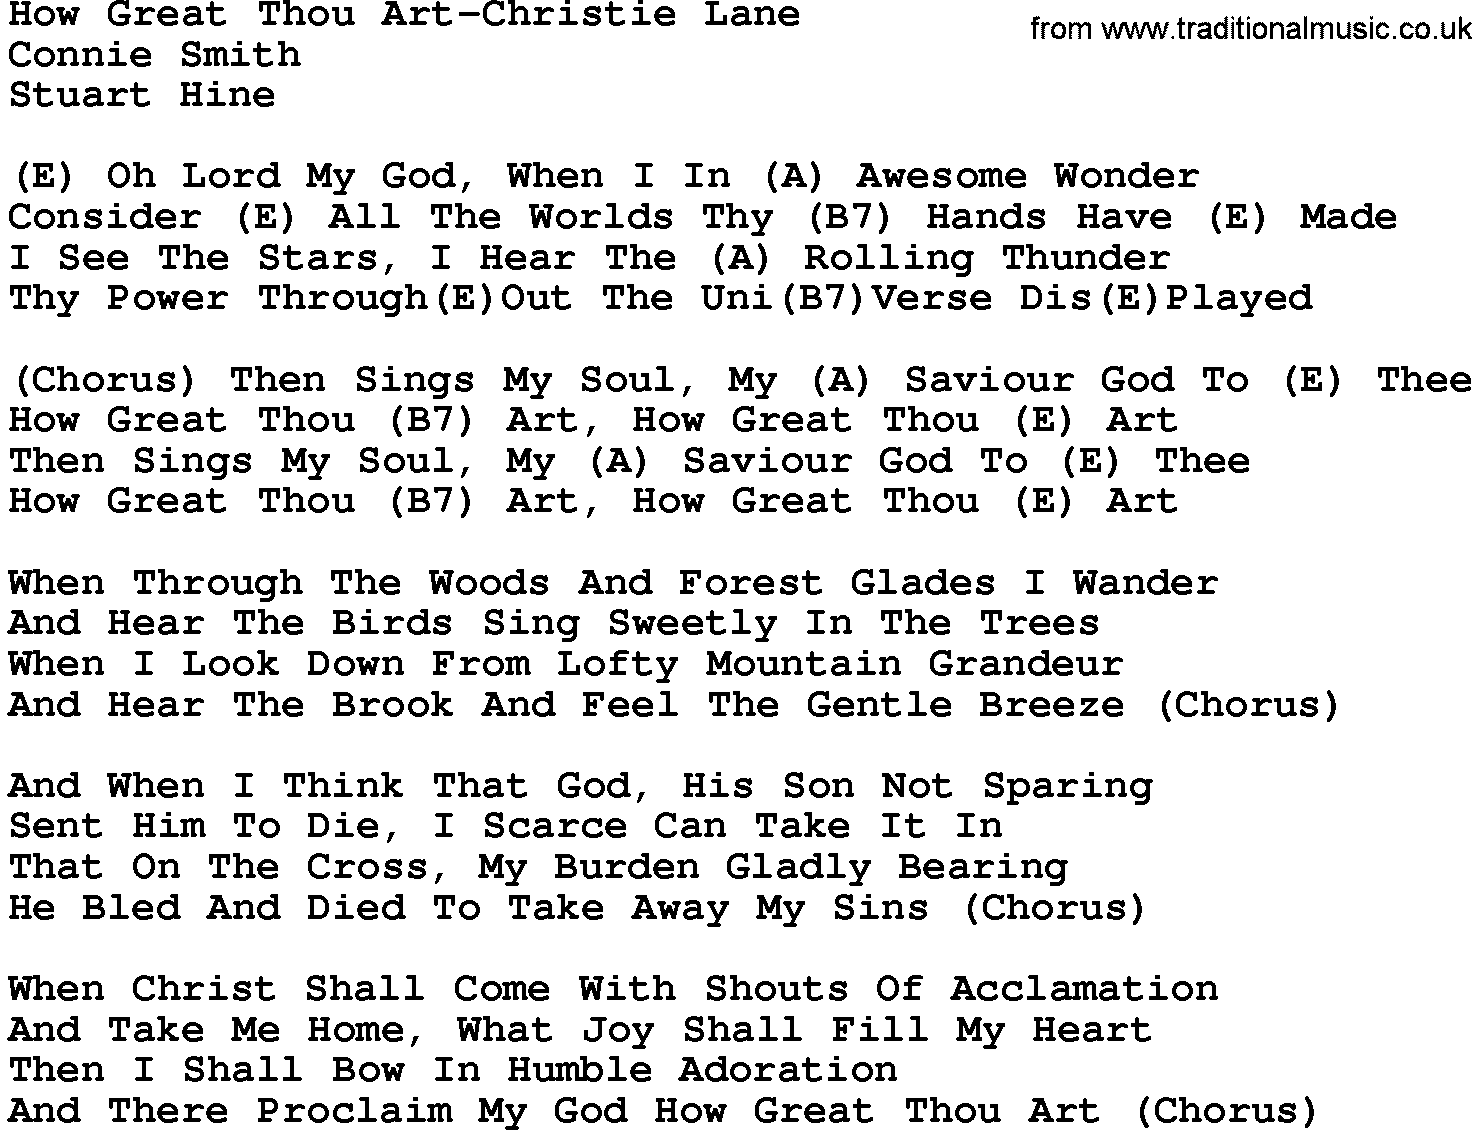 Country music song: How Great Thou Art-Christie Lane lyrics and chords